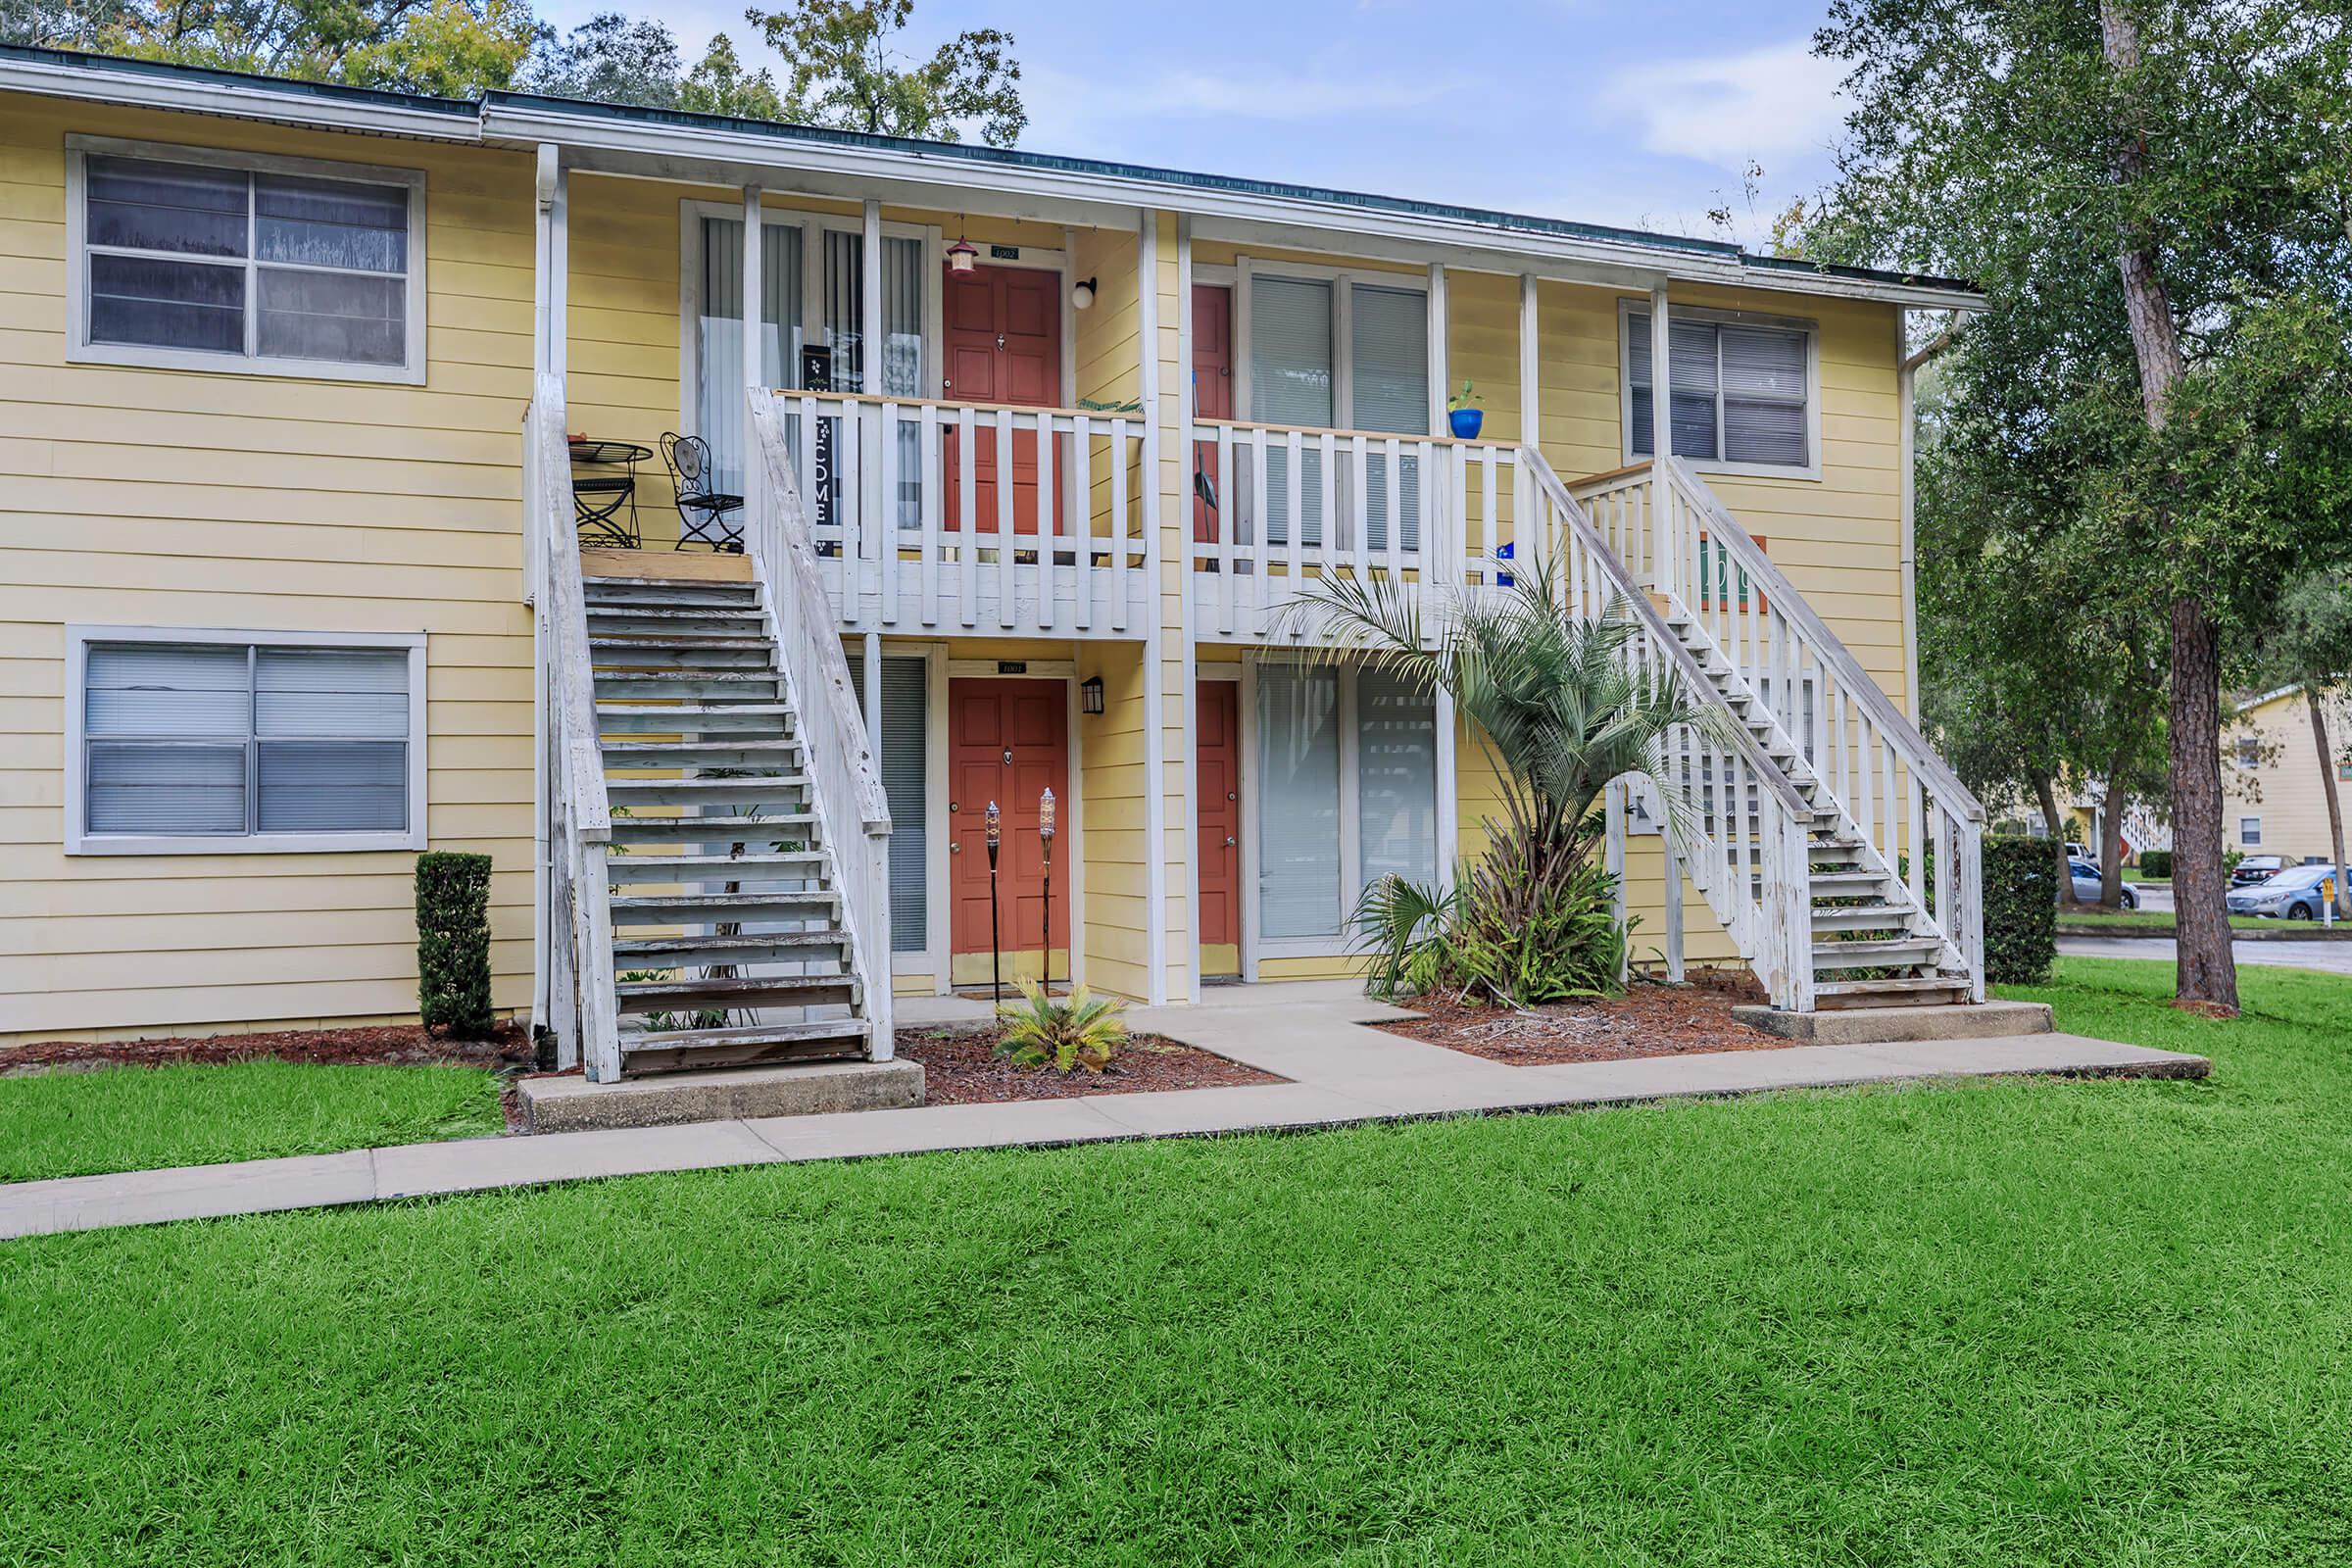 APARTMENT HOMES FOR RENT IN JACKSONVILLE, FL